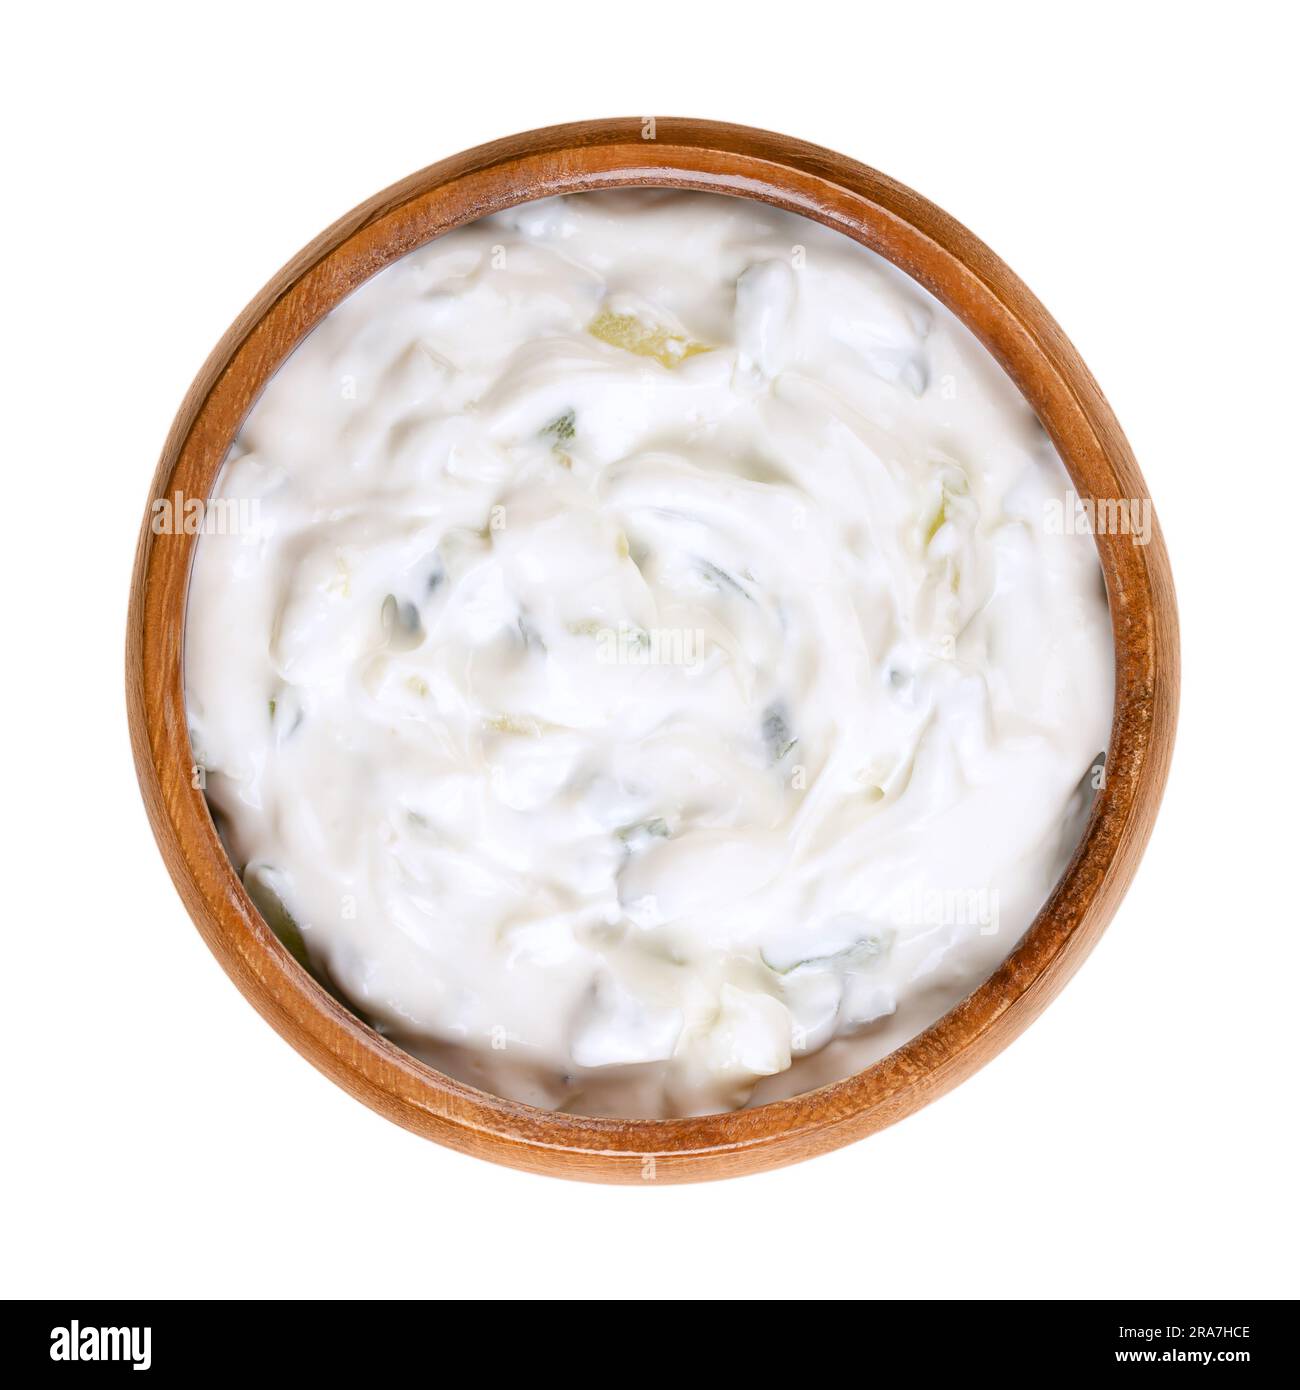 Tzatziki, in a wooden bowl. Fresh Greek dip sauce, served as an appetizer (meze) or side dish, and made of strained yogurt. Stock Photo